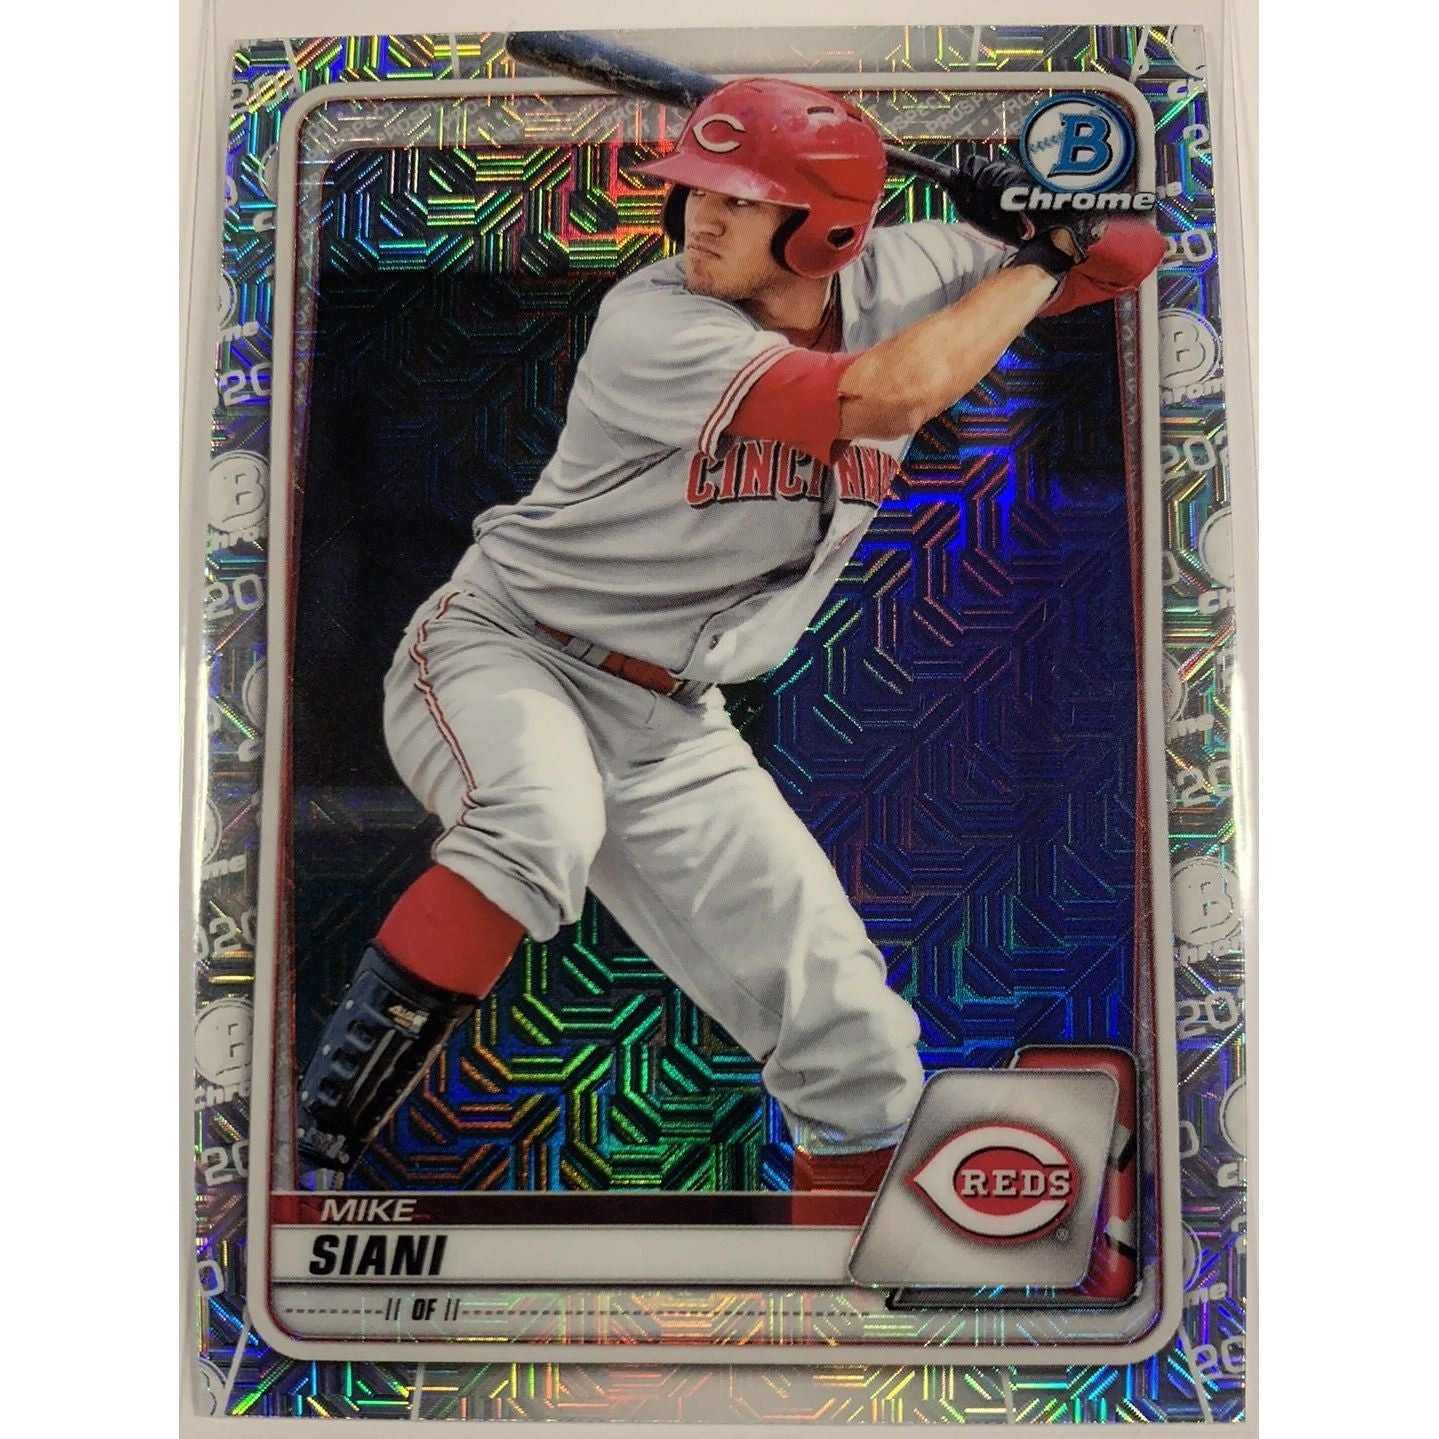  2020 Bowman Chrome Mike Siani Mojo Refractor  Local Legends Cards & Collectibles